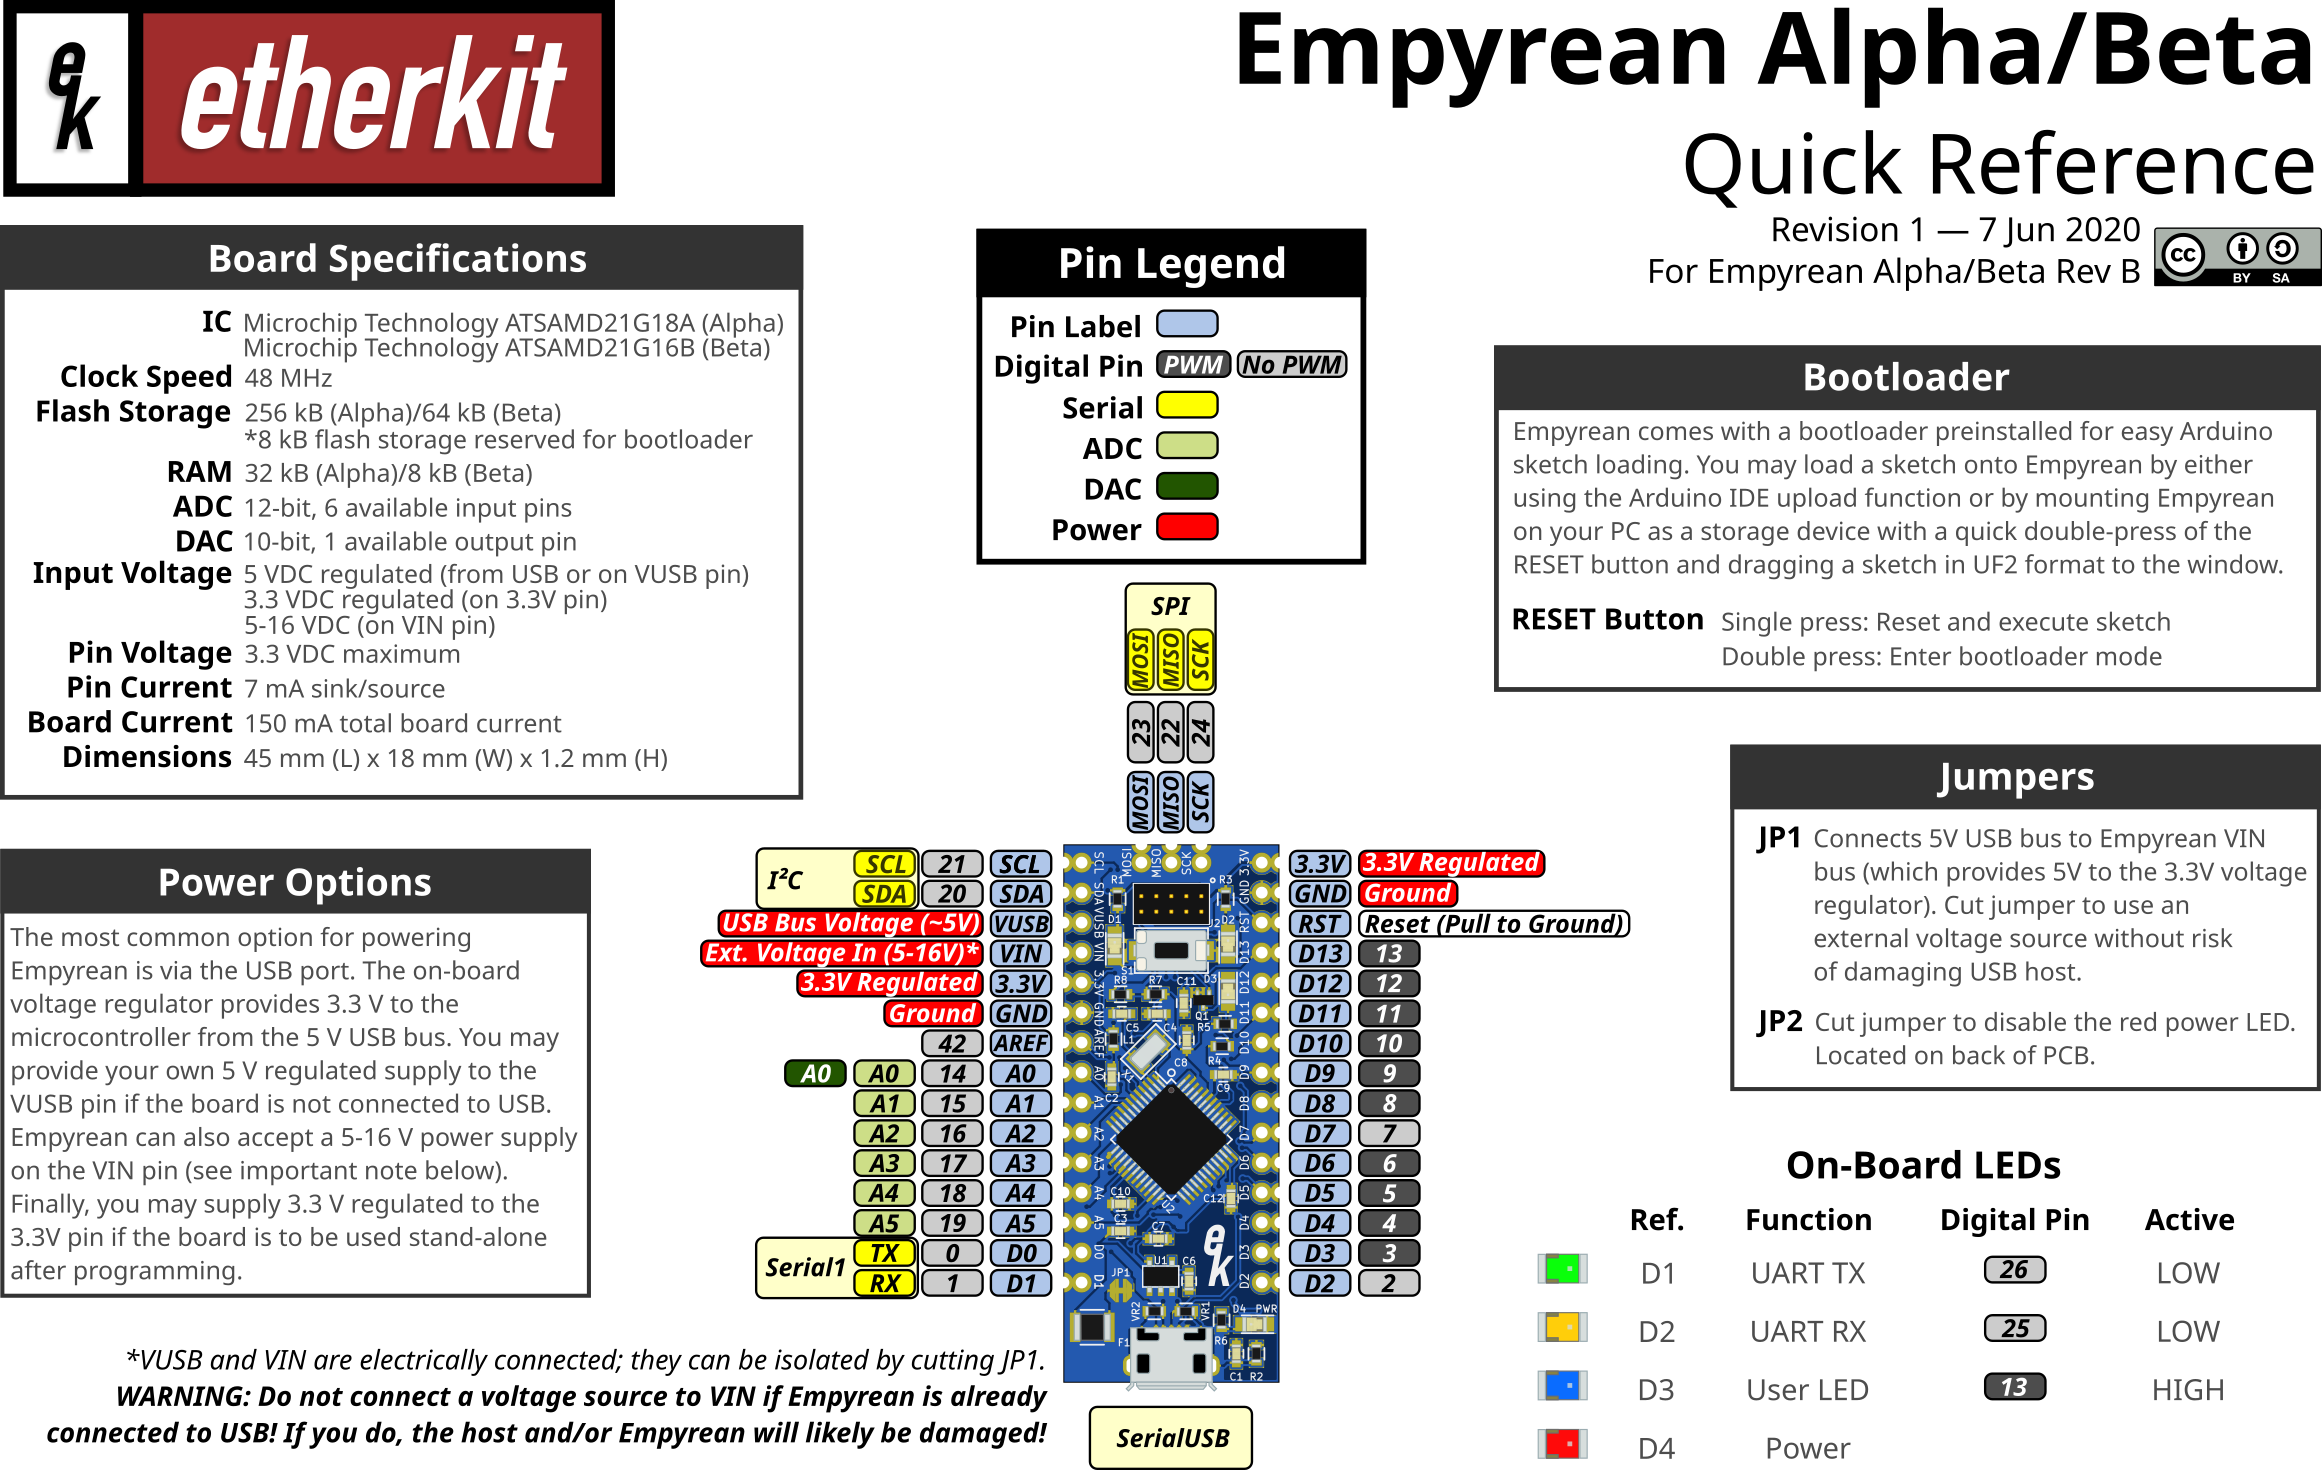 Empyrean Quick Reference